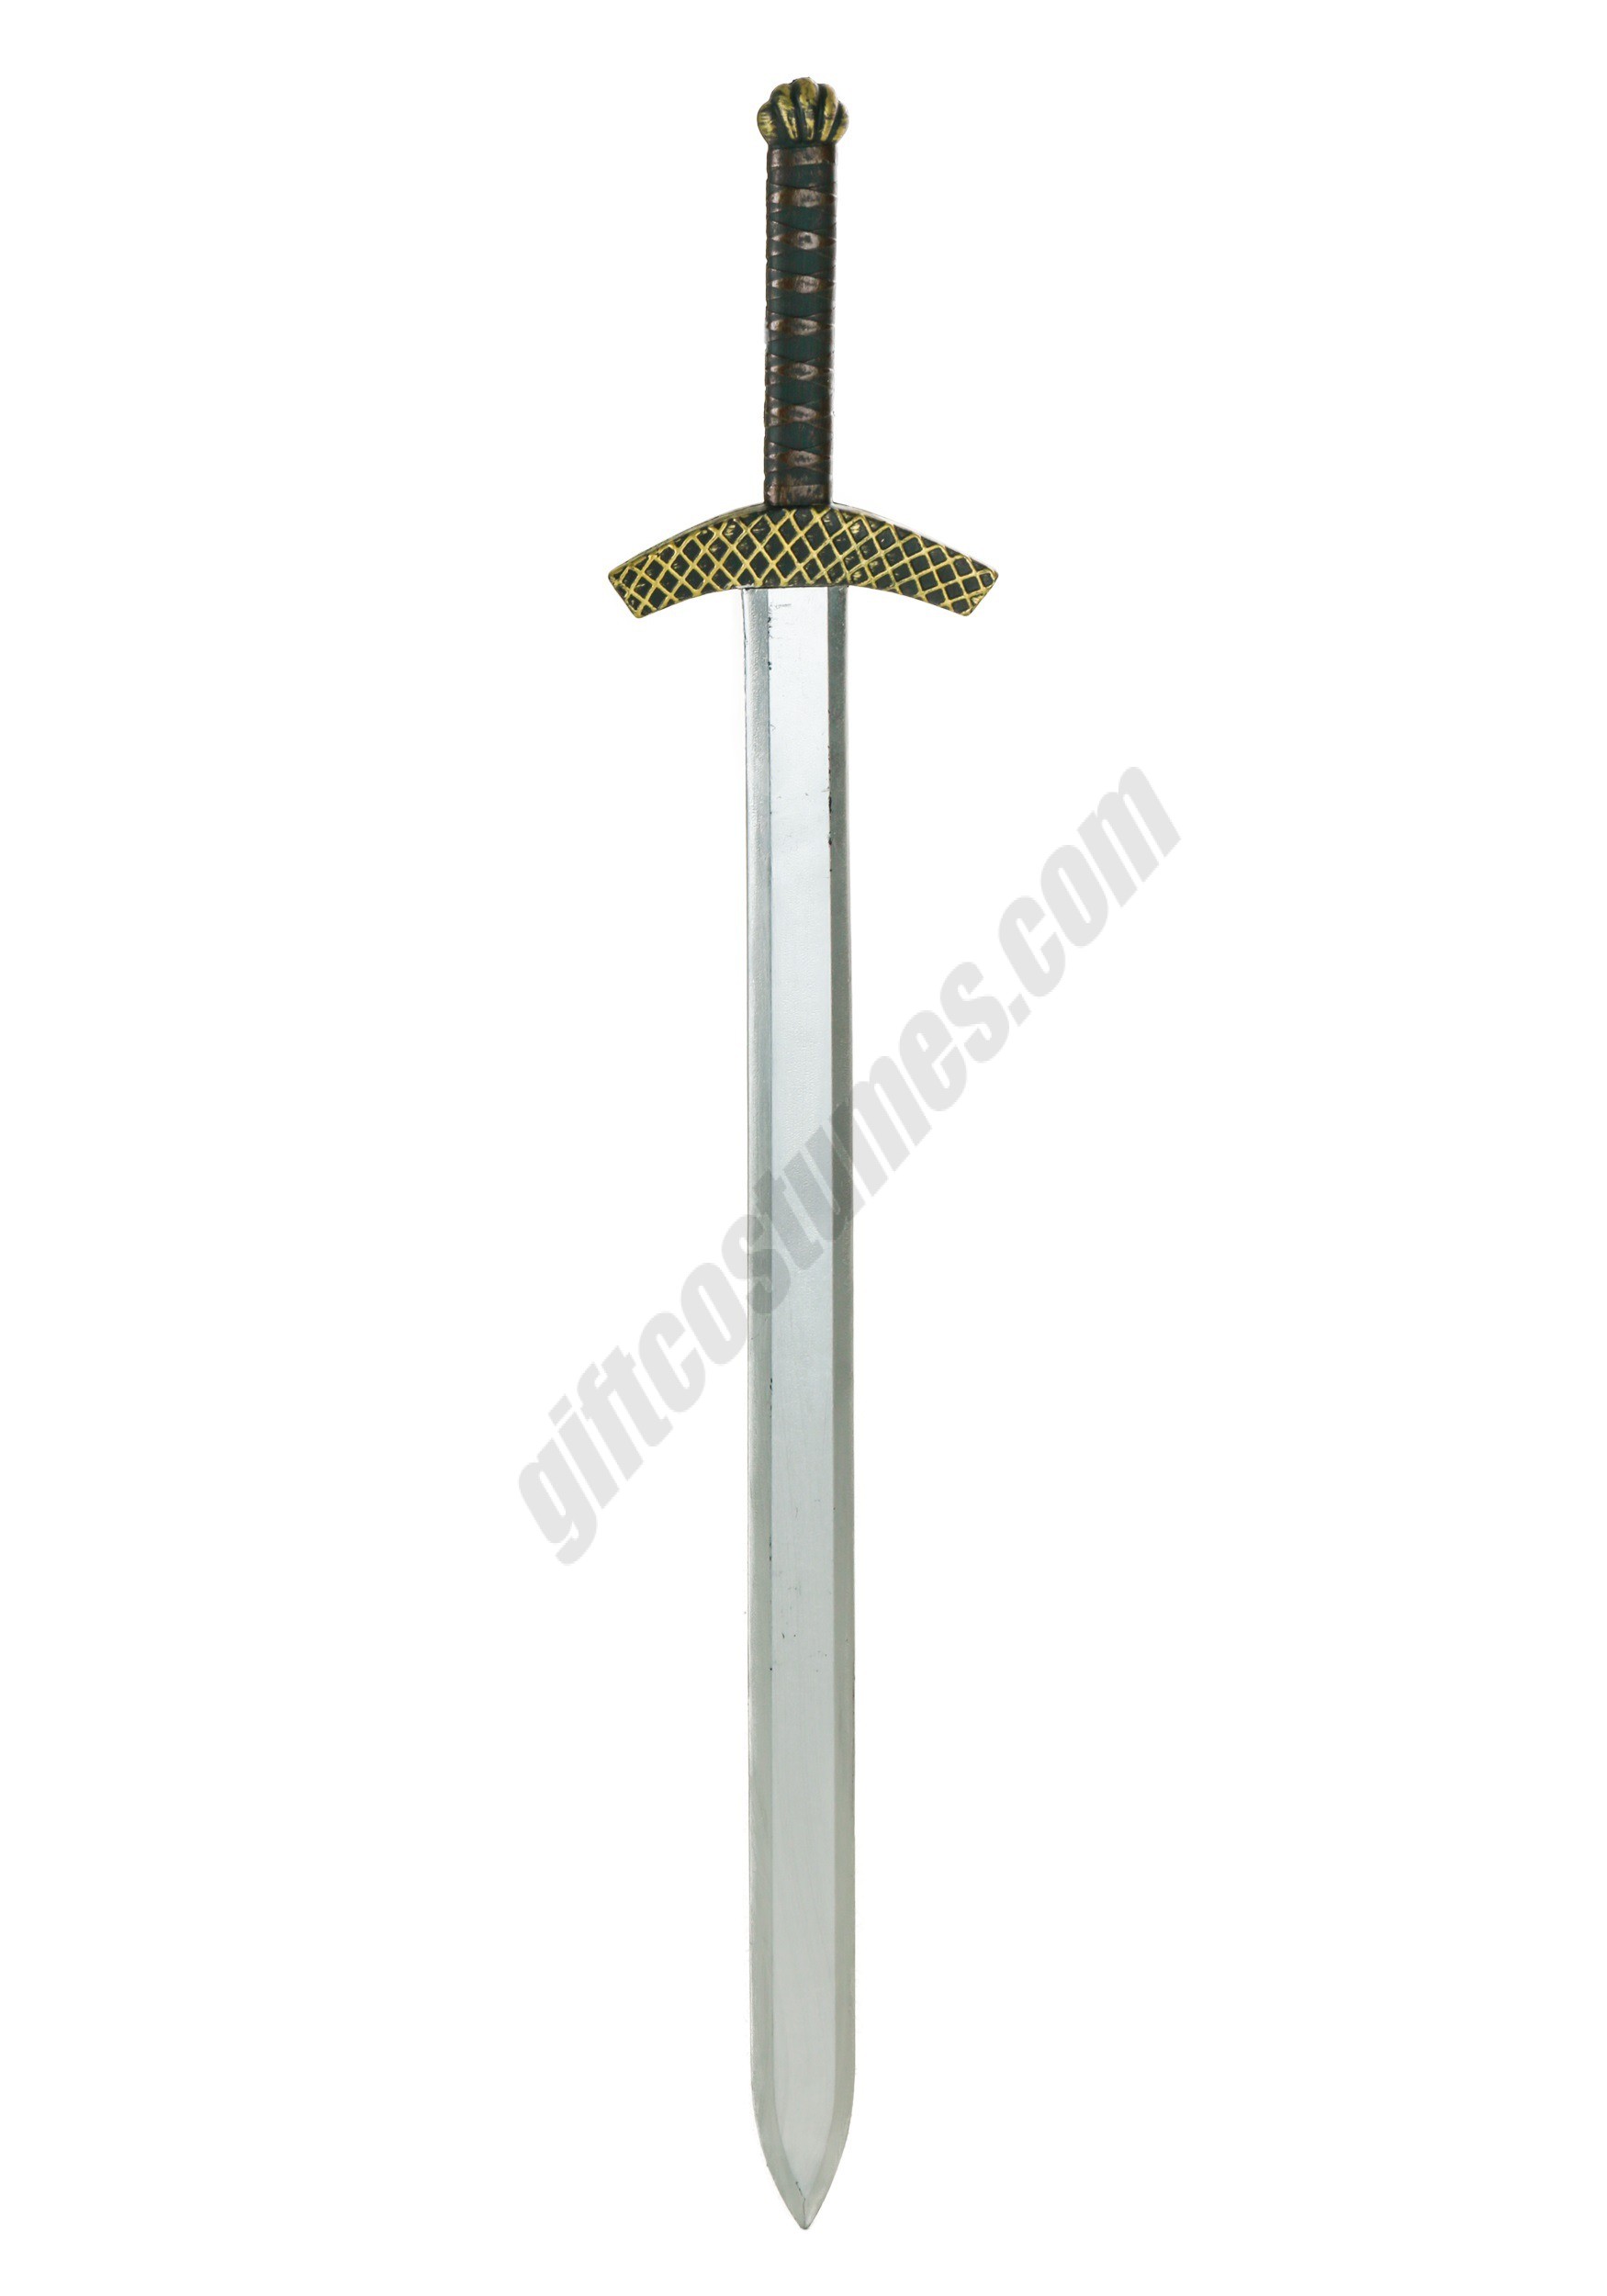 Royal Knight's Sword Promotions - Royal Knight's Sword Promotions